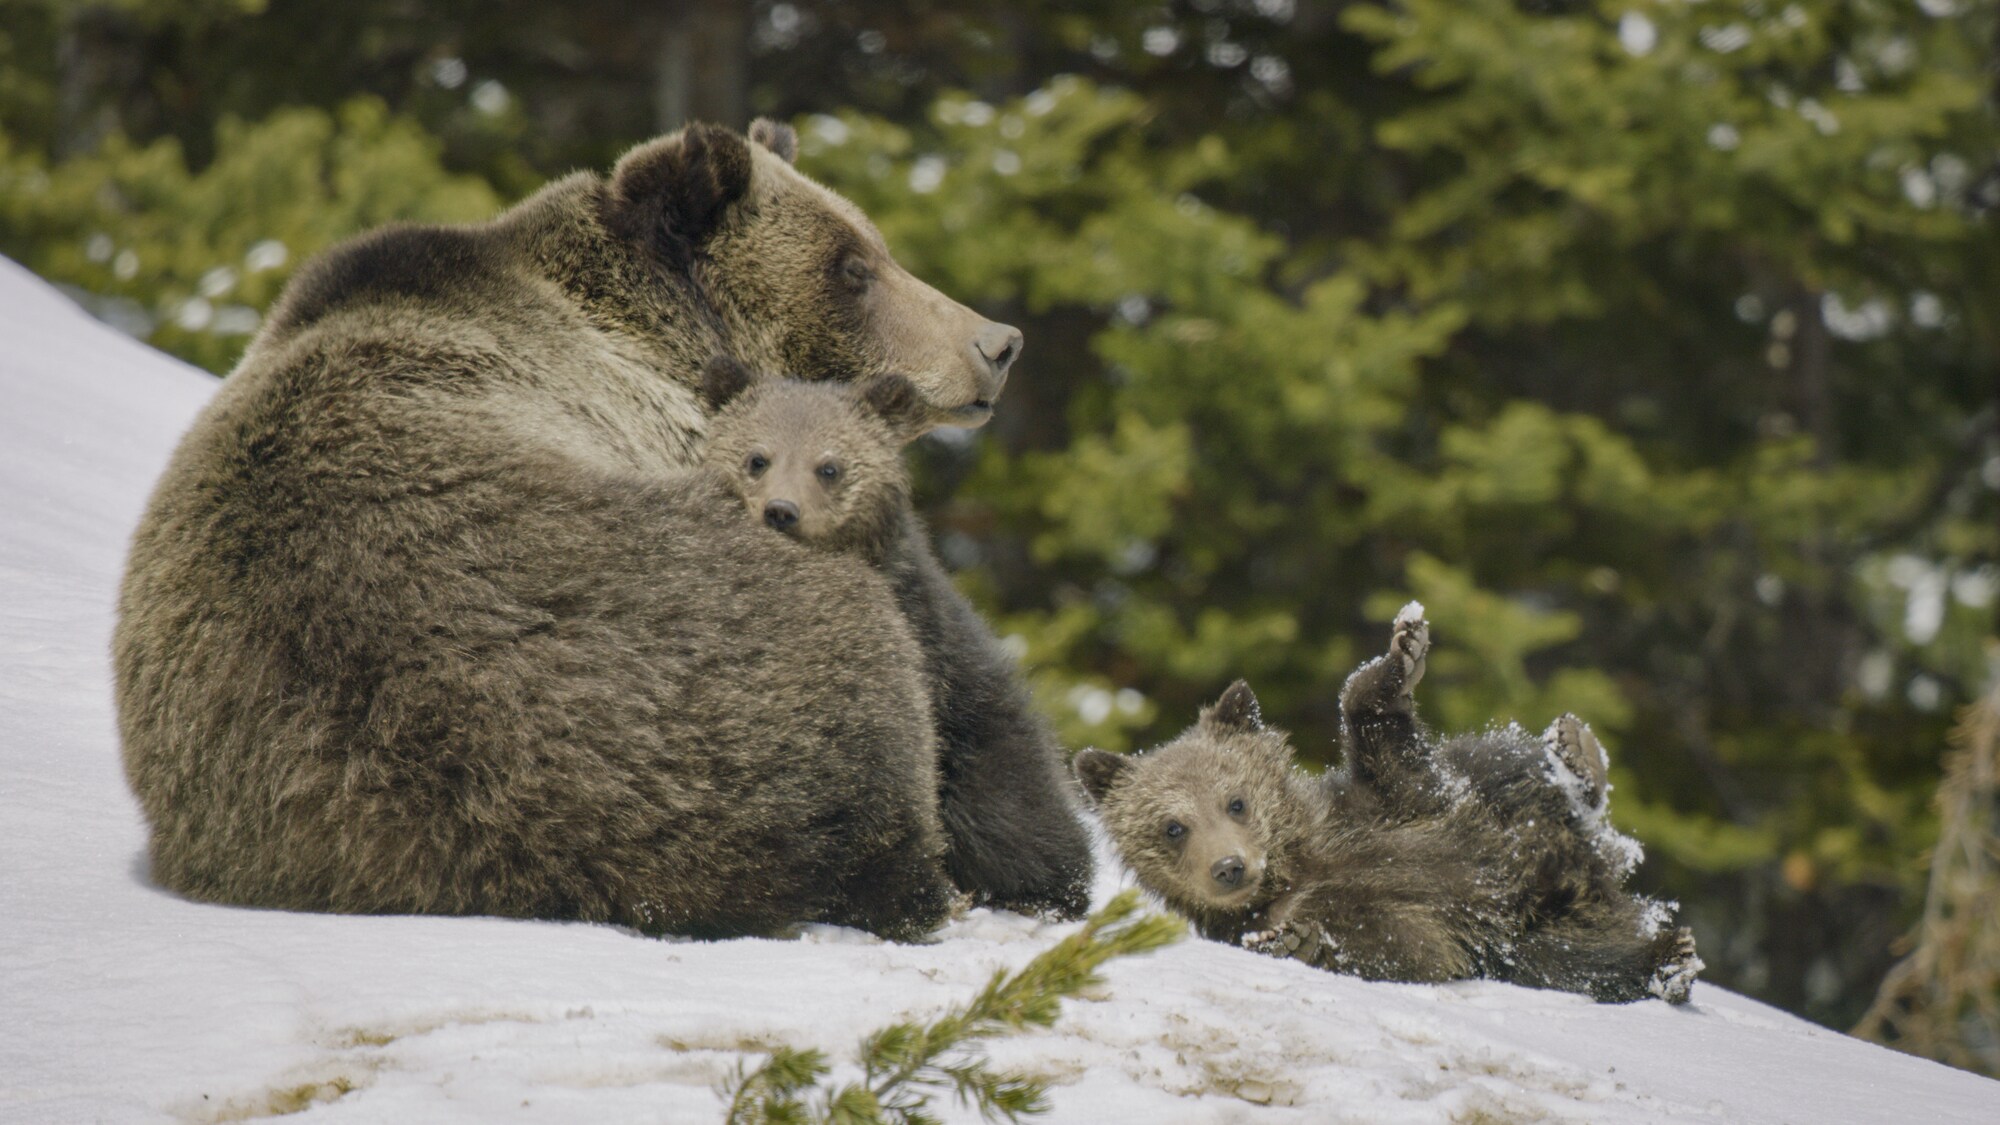 Grizzly bear mother and cubs emerge from their dens into a winter wonderland. (National Geographic for Disney+)